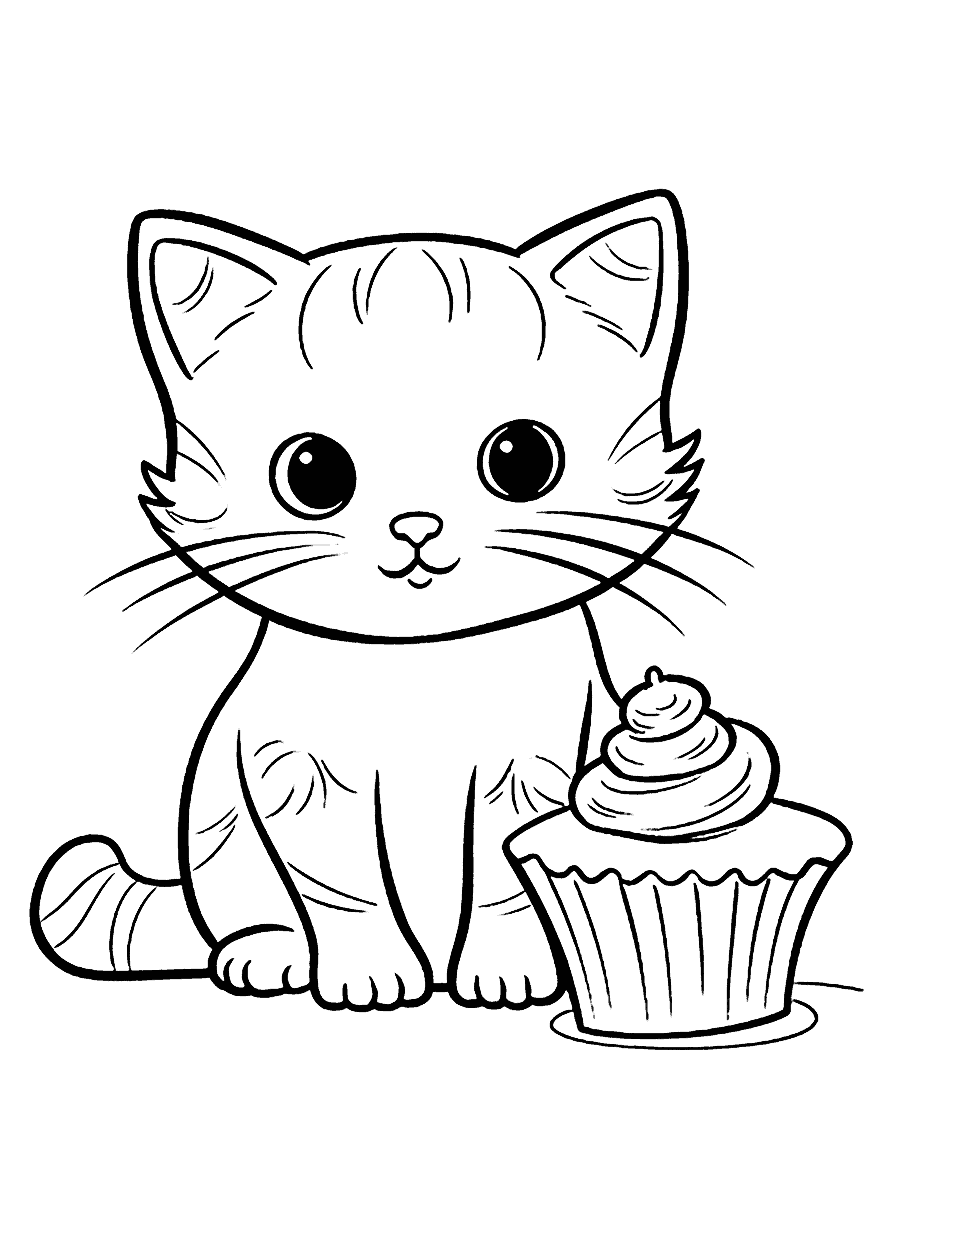 Kawaii Kitten and a Cupcake Cat Coloring Page - A super cute kitten sniffing a brightly frosted cupcake.